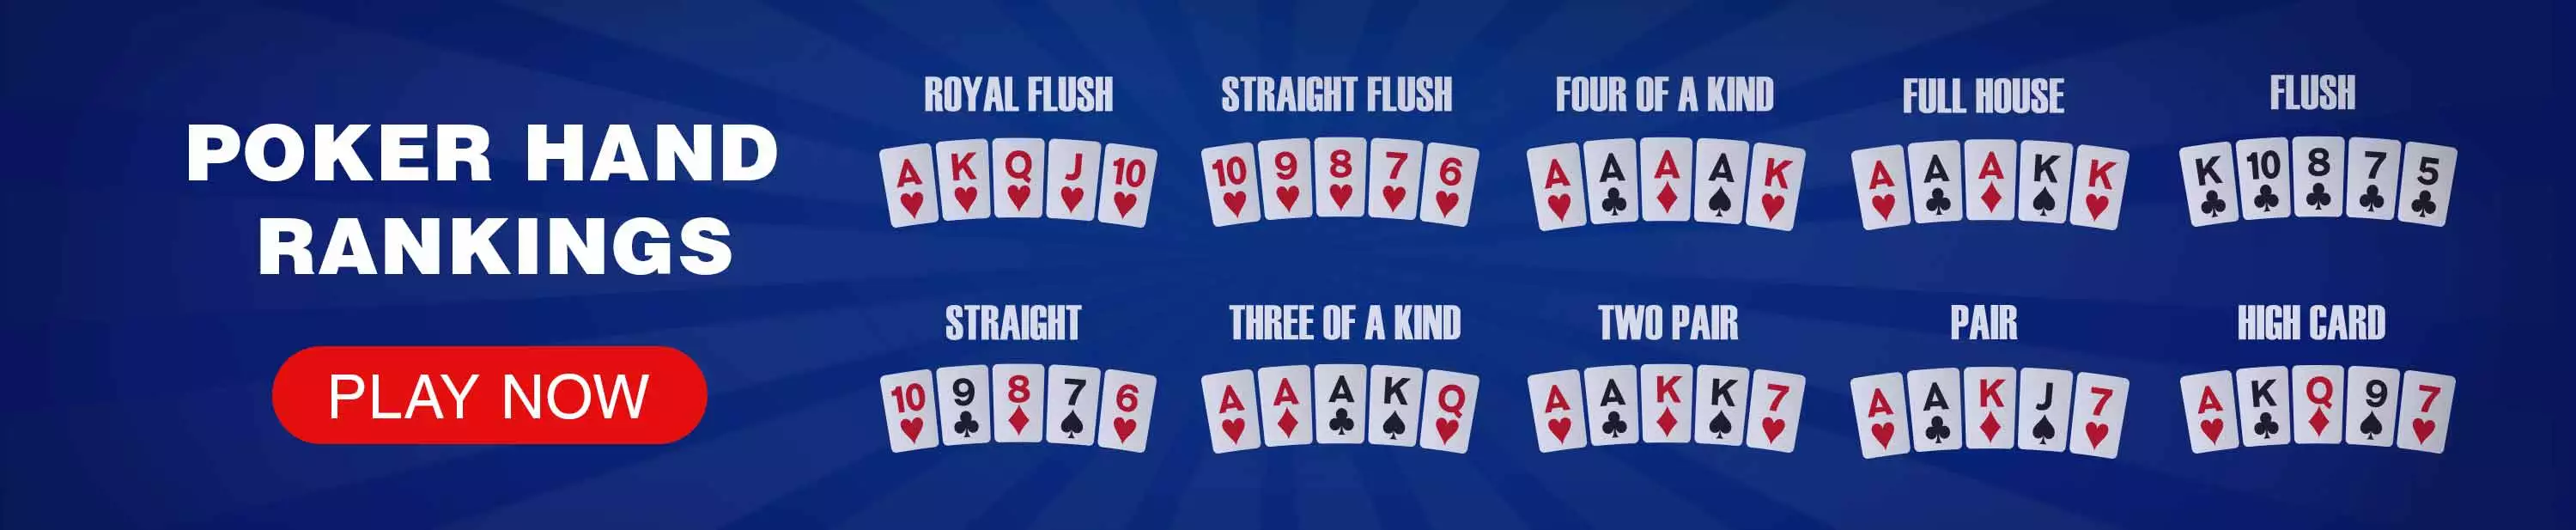 Poker Sequence
        Highest to Lowest